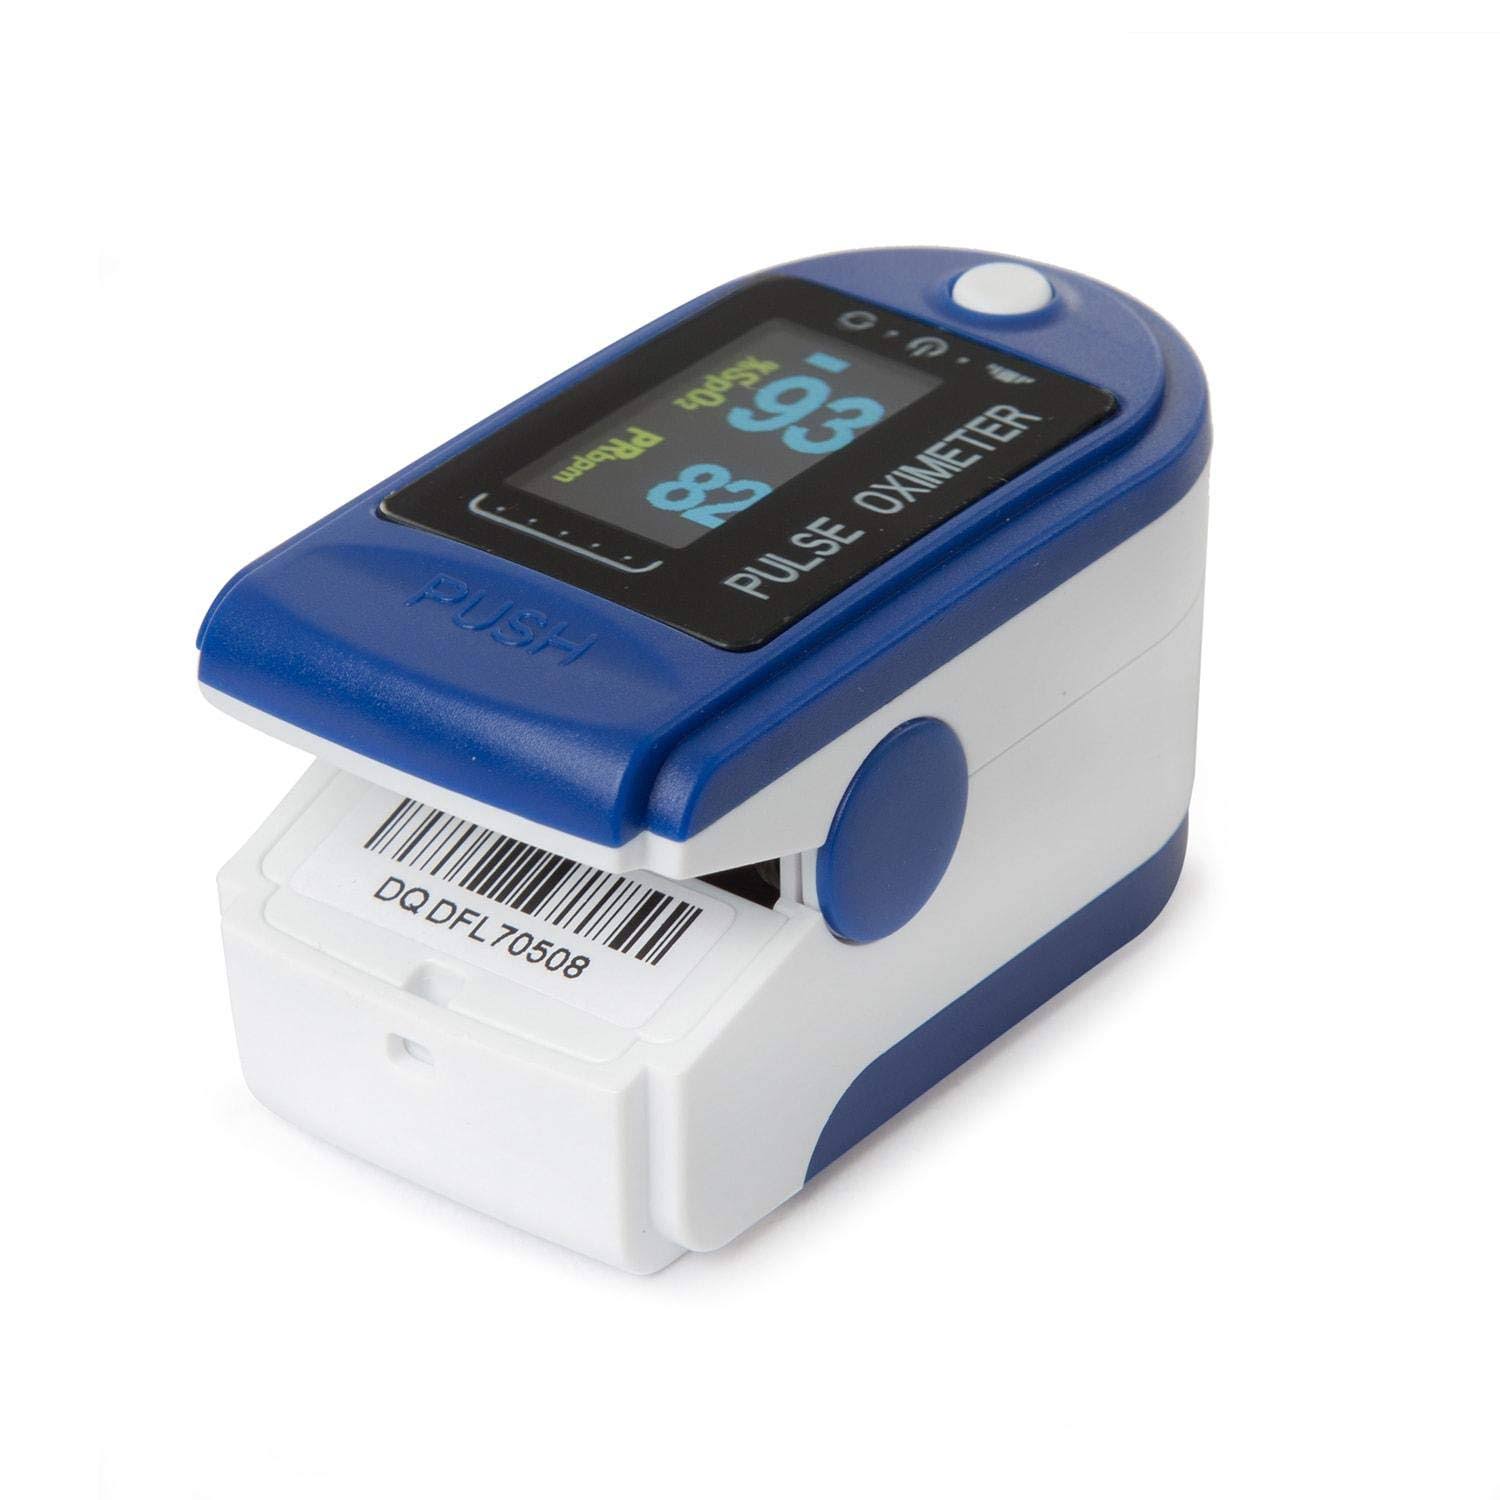 Pulse Oximeter NC/NR 1 Count by Veridian Healthcare